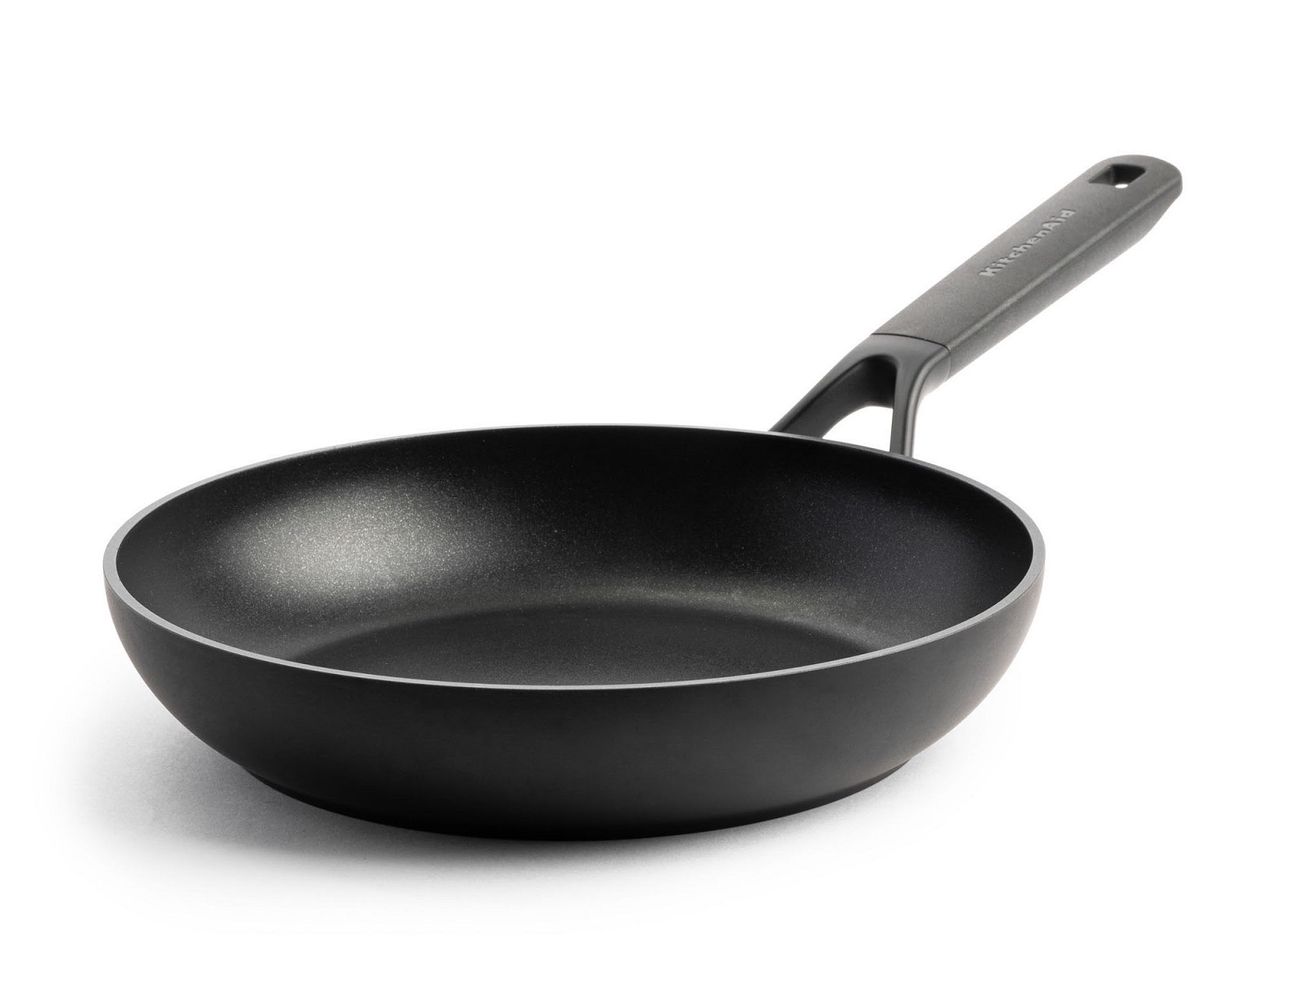 KitchenAid Classic Frying Pan Set, Non-Stick Aluminium Pans with Stay Cool  Handle - Induction, Oven & Dishwasher Safe - 20/24/28 cm